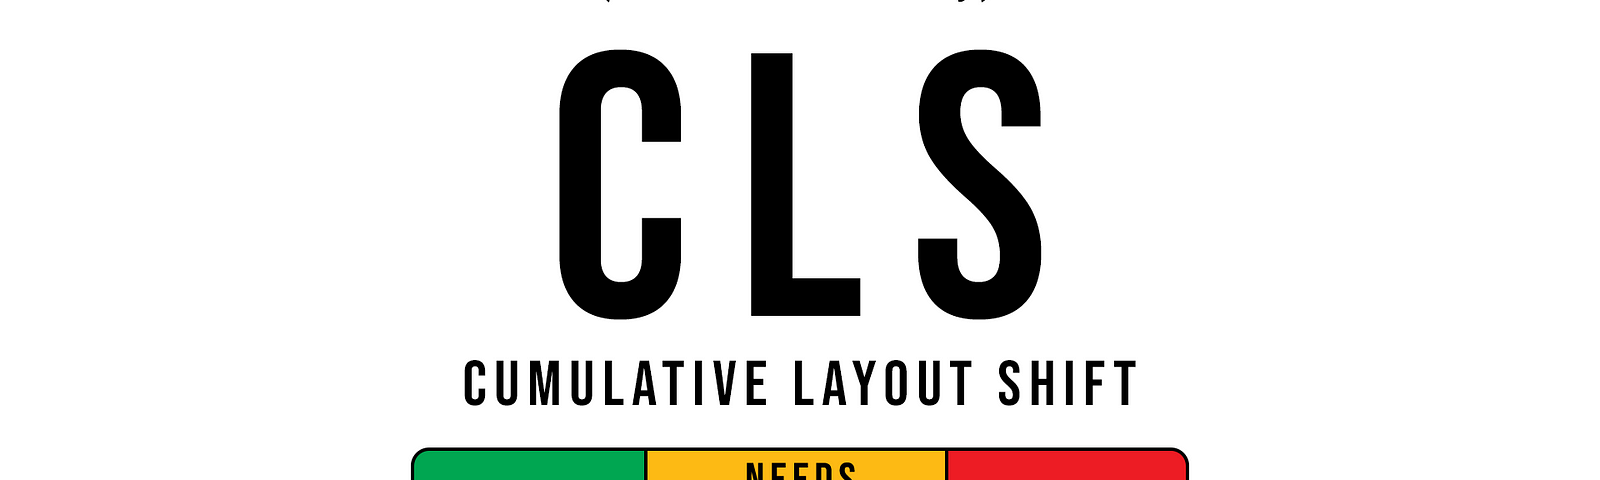 How to improve Cumulative Layout Shift (CLS)